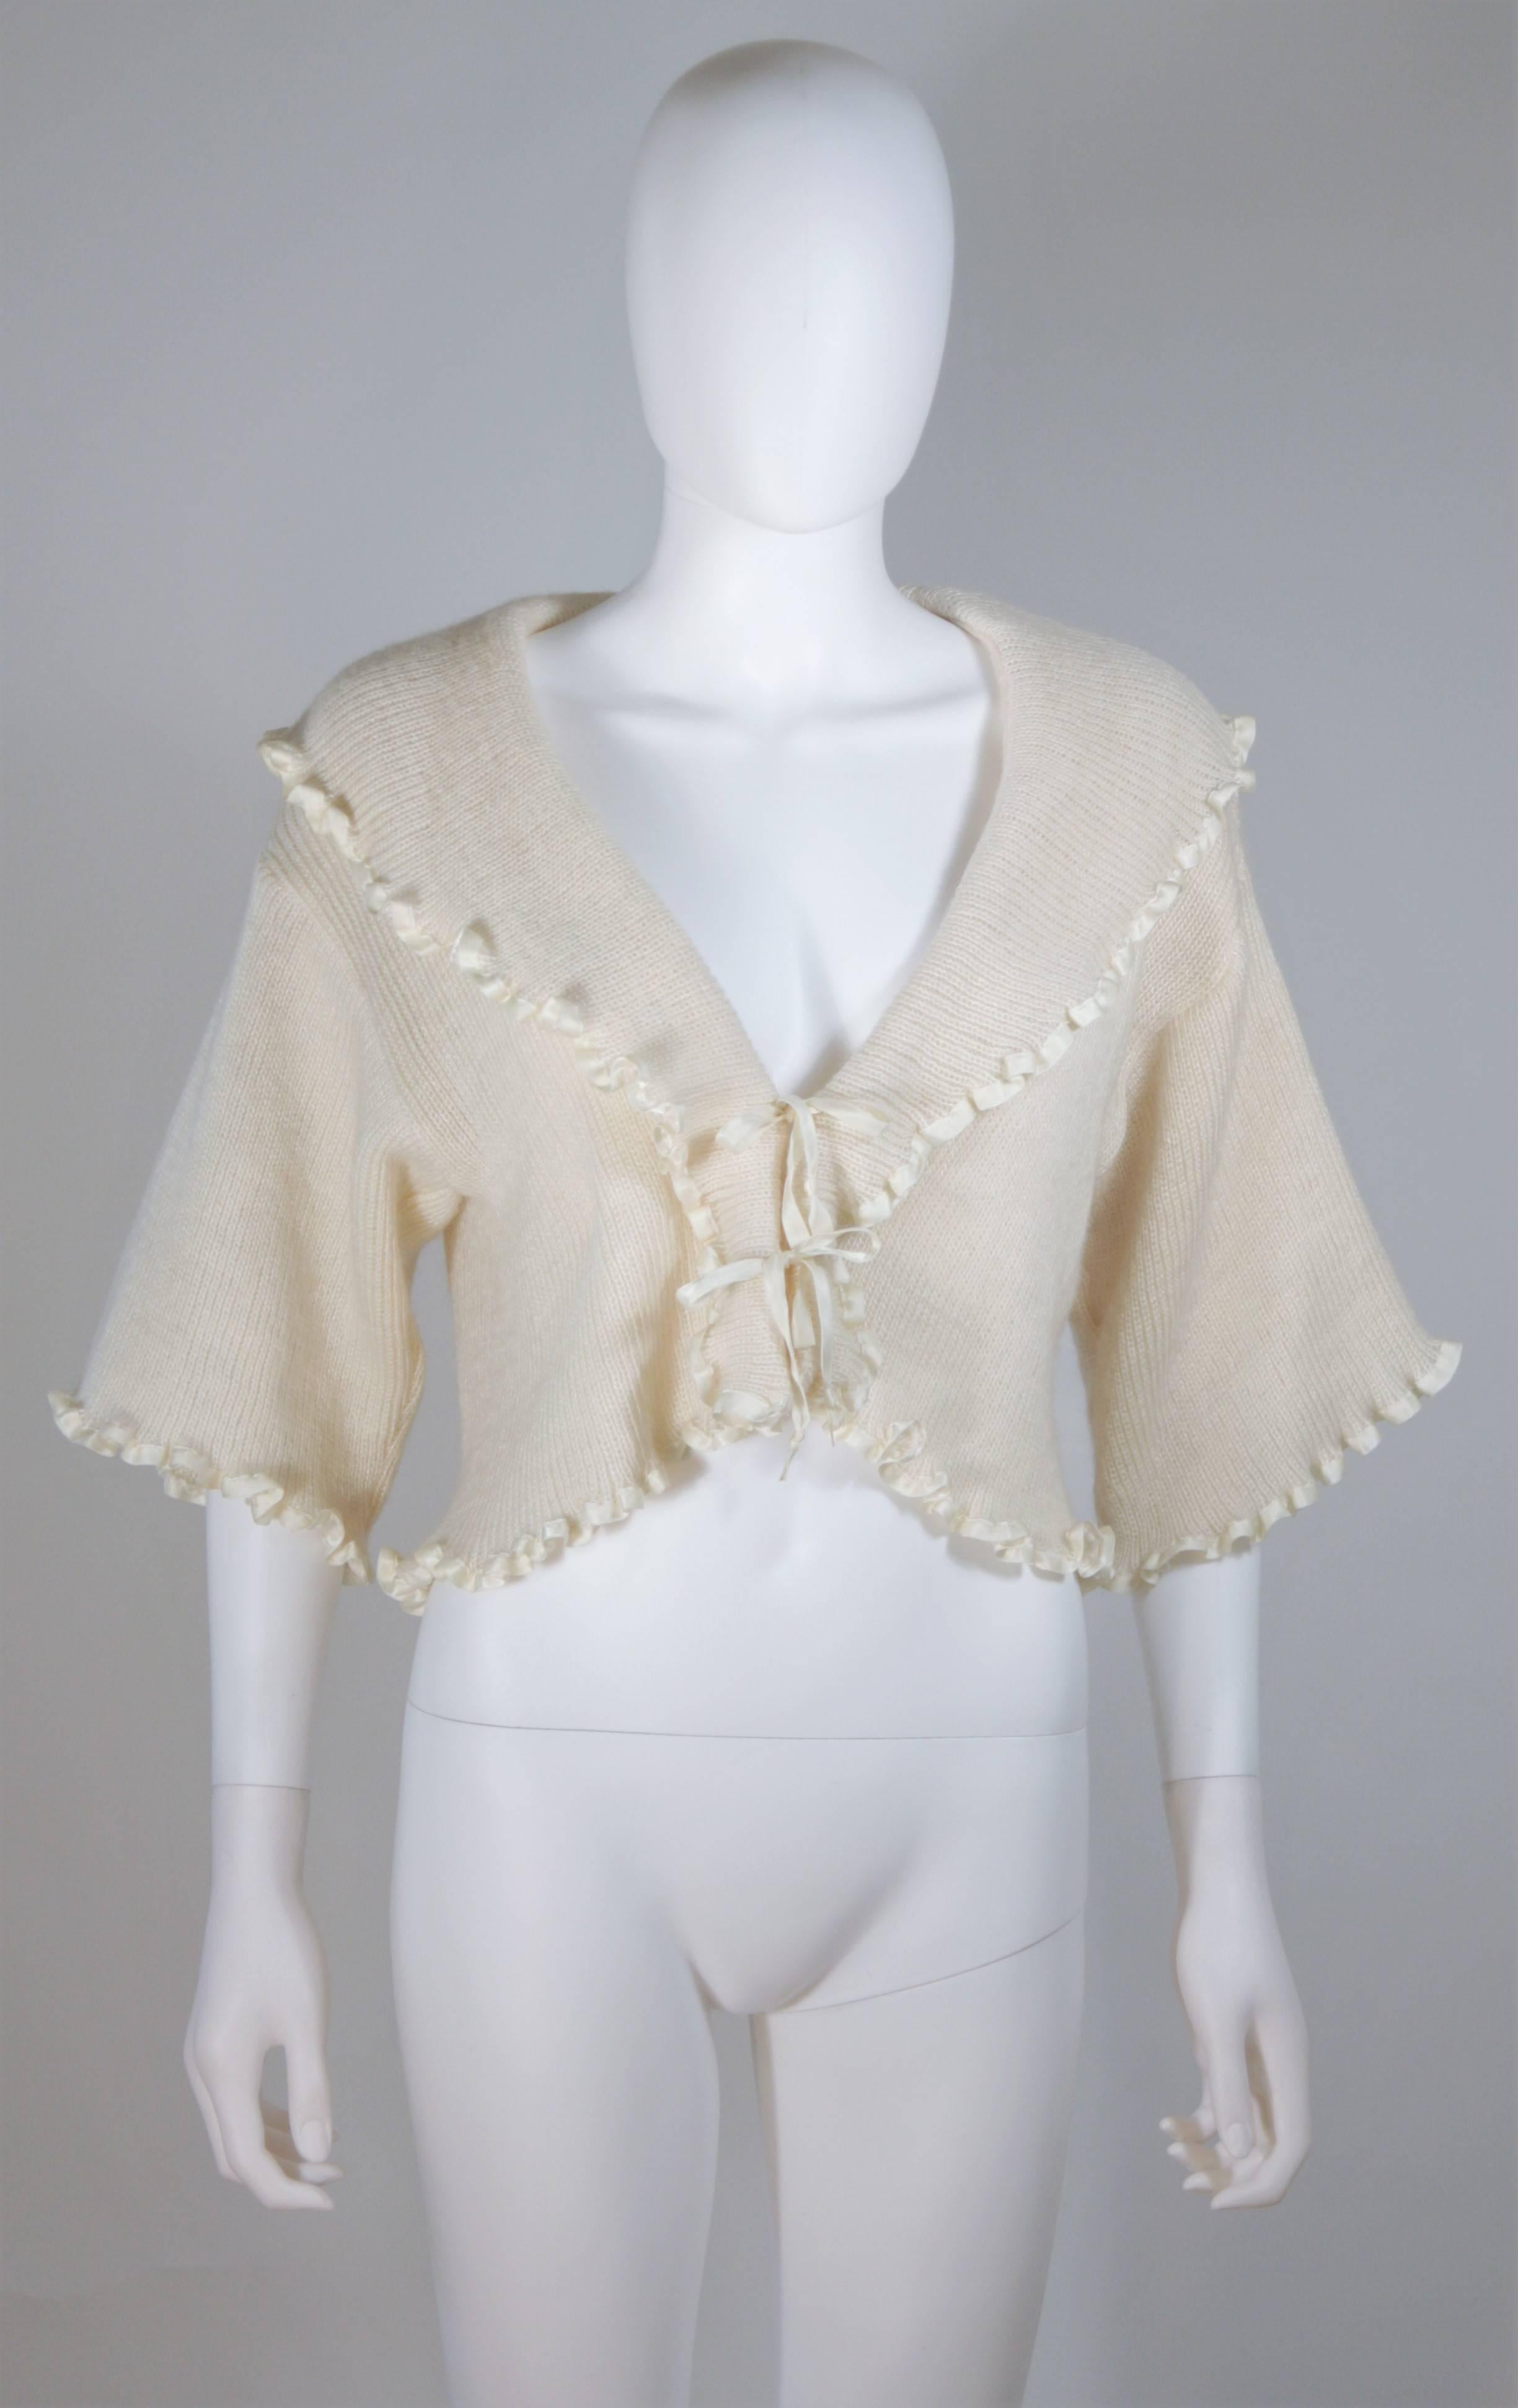 This Christian Dior sweater is composed of an off white knit cashmere blend. Features a ruffled edge with satin trim and tie front style closure. In excellent vintage condition. 

  **Please cross-reference measurements for personal accuracy. Size